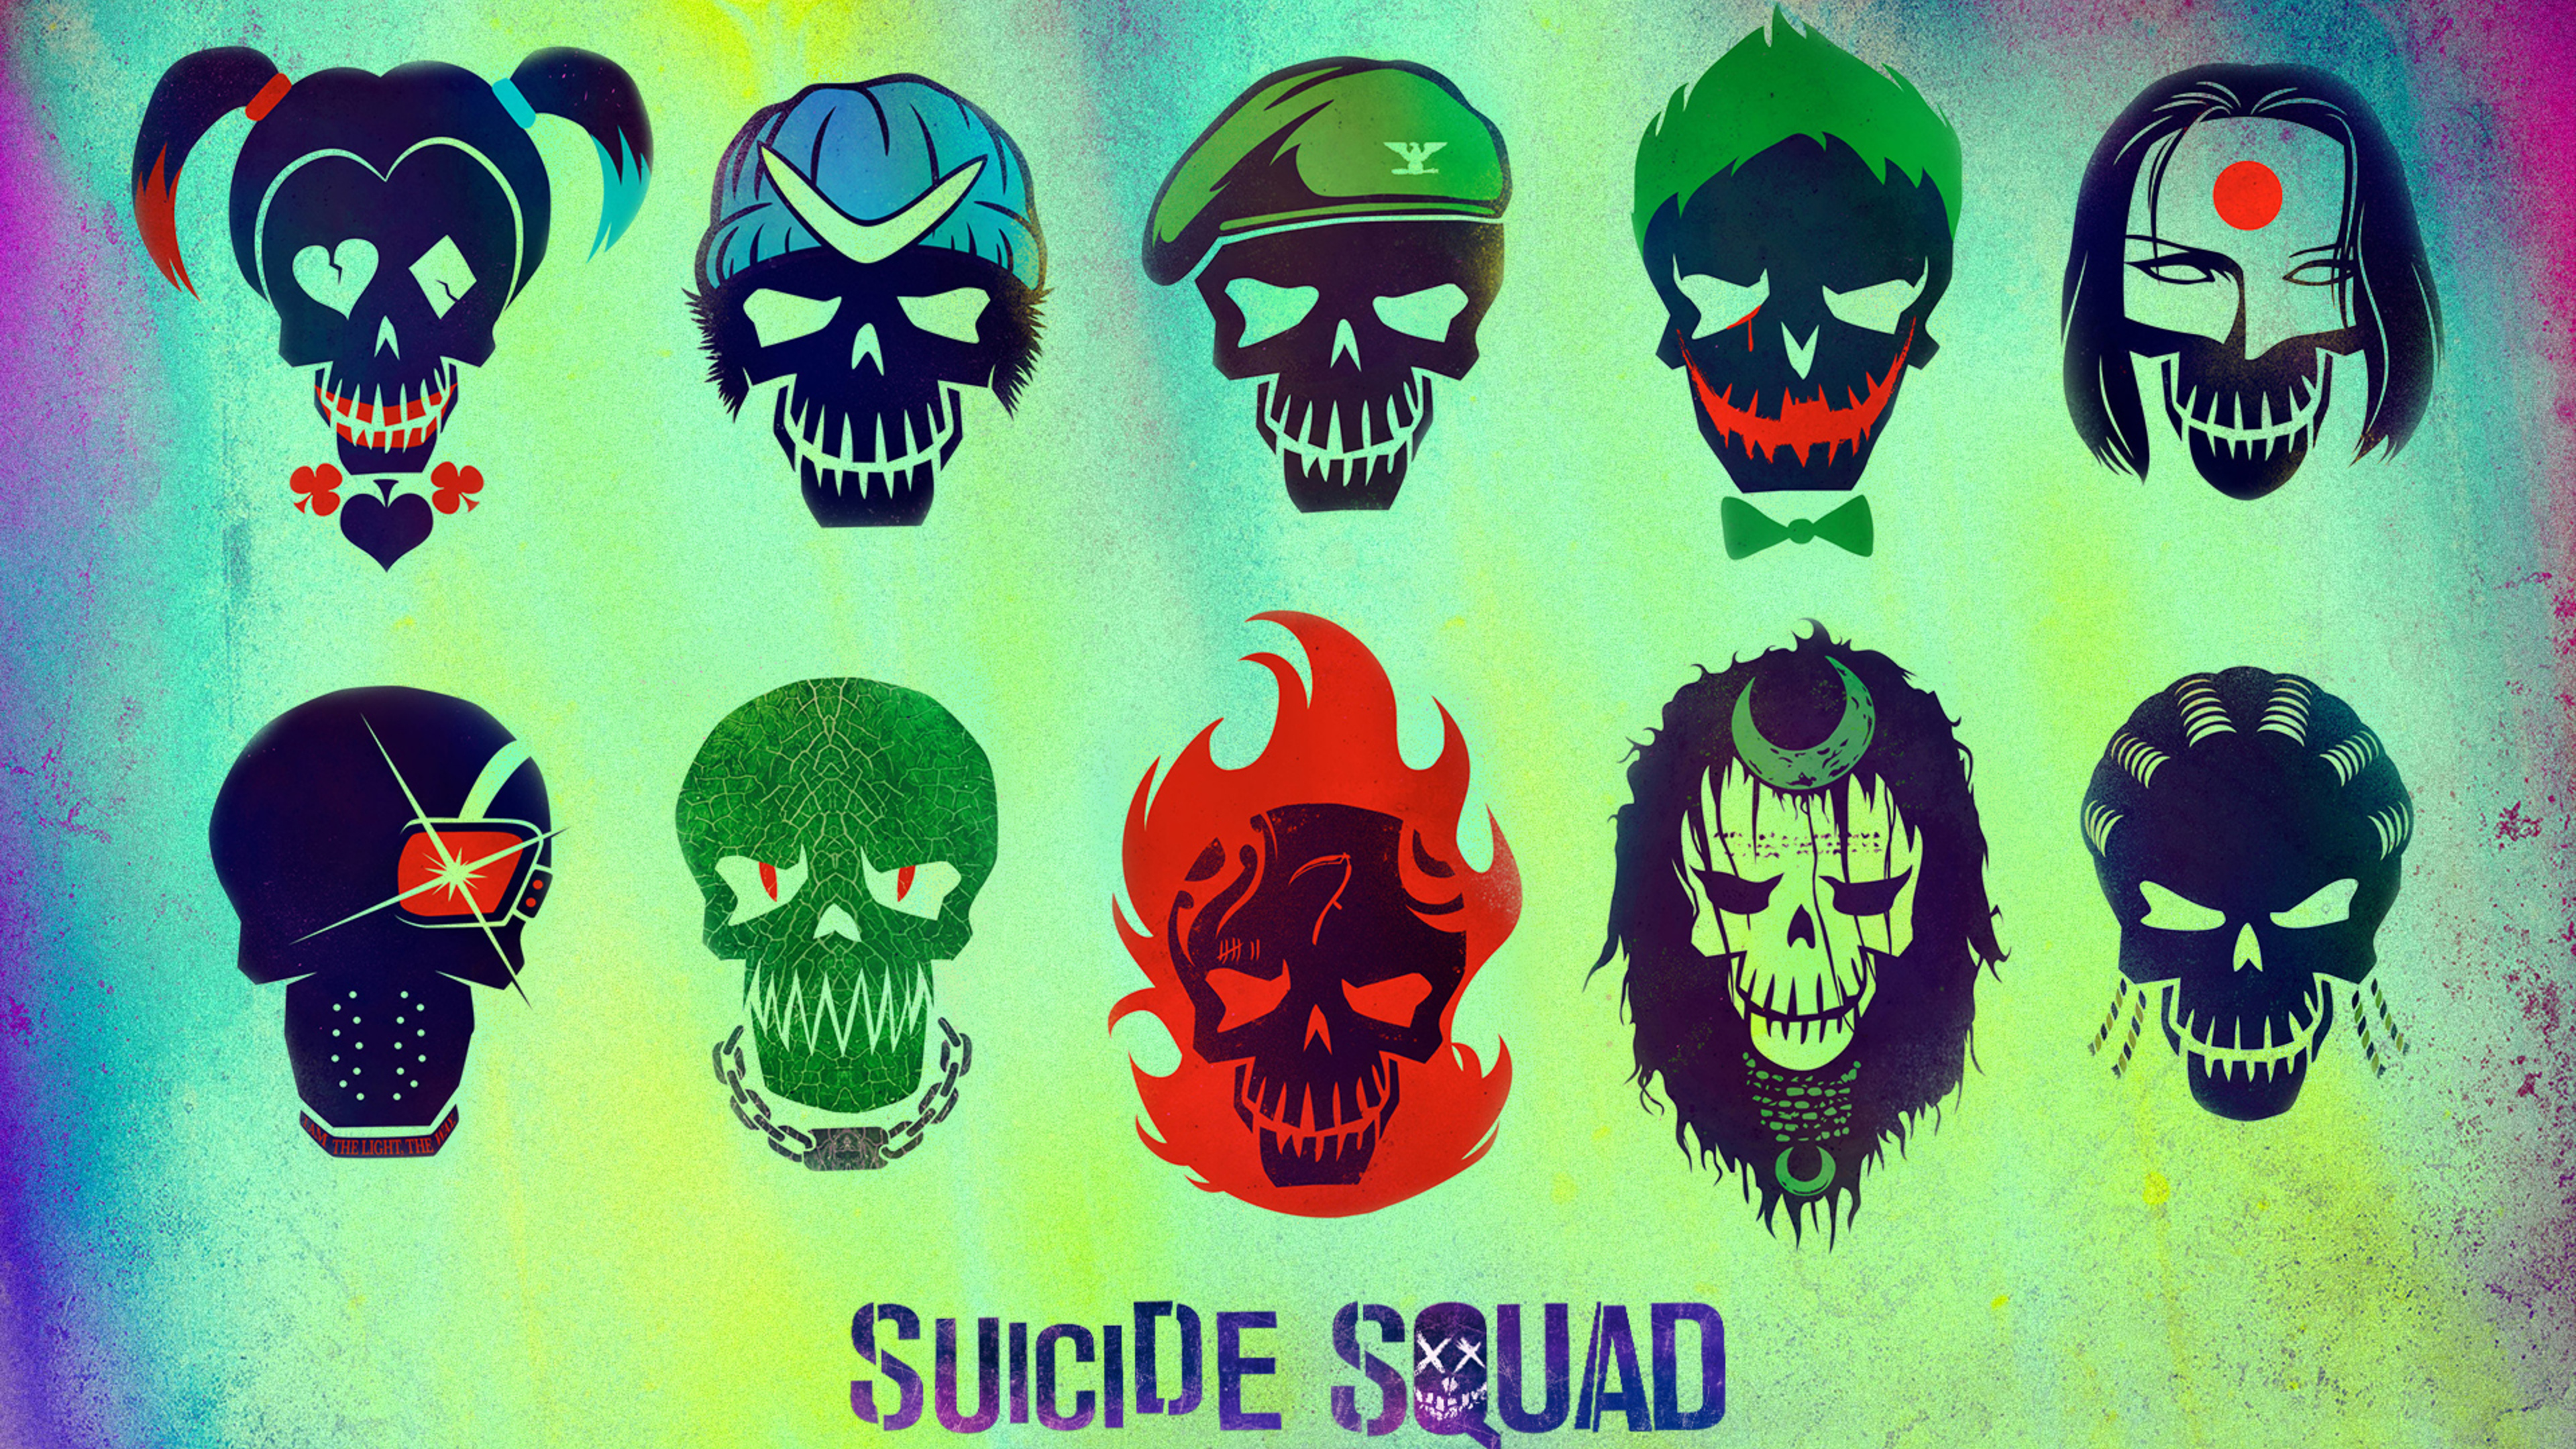 http://hdqwalls.com/download/suicide-squad-characters-minimalism-image-3840x2160.jpg